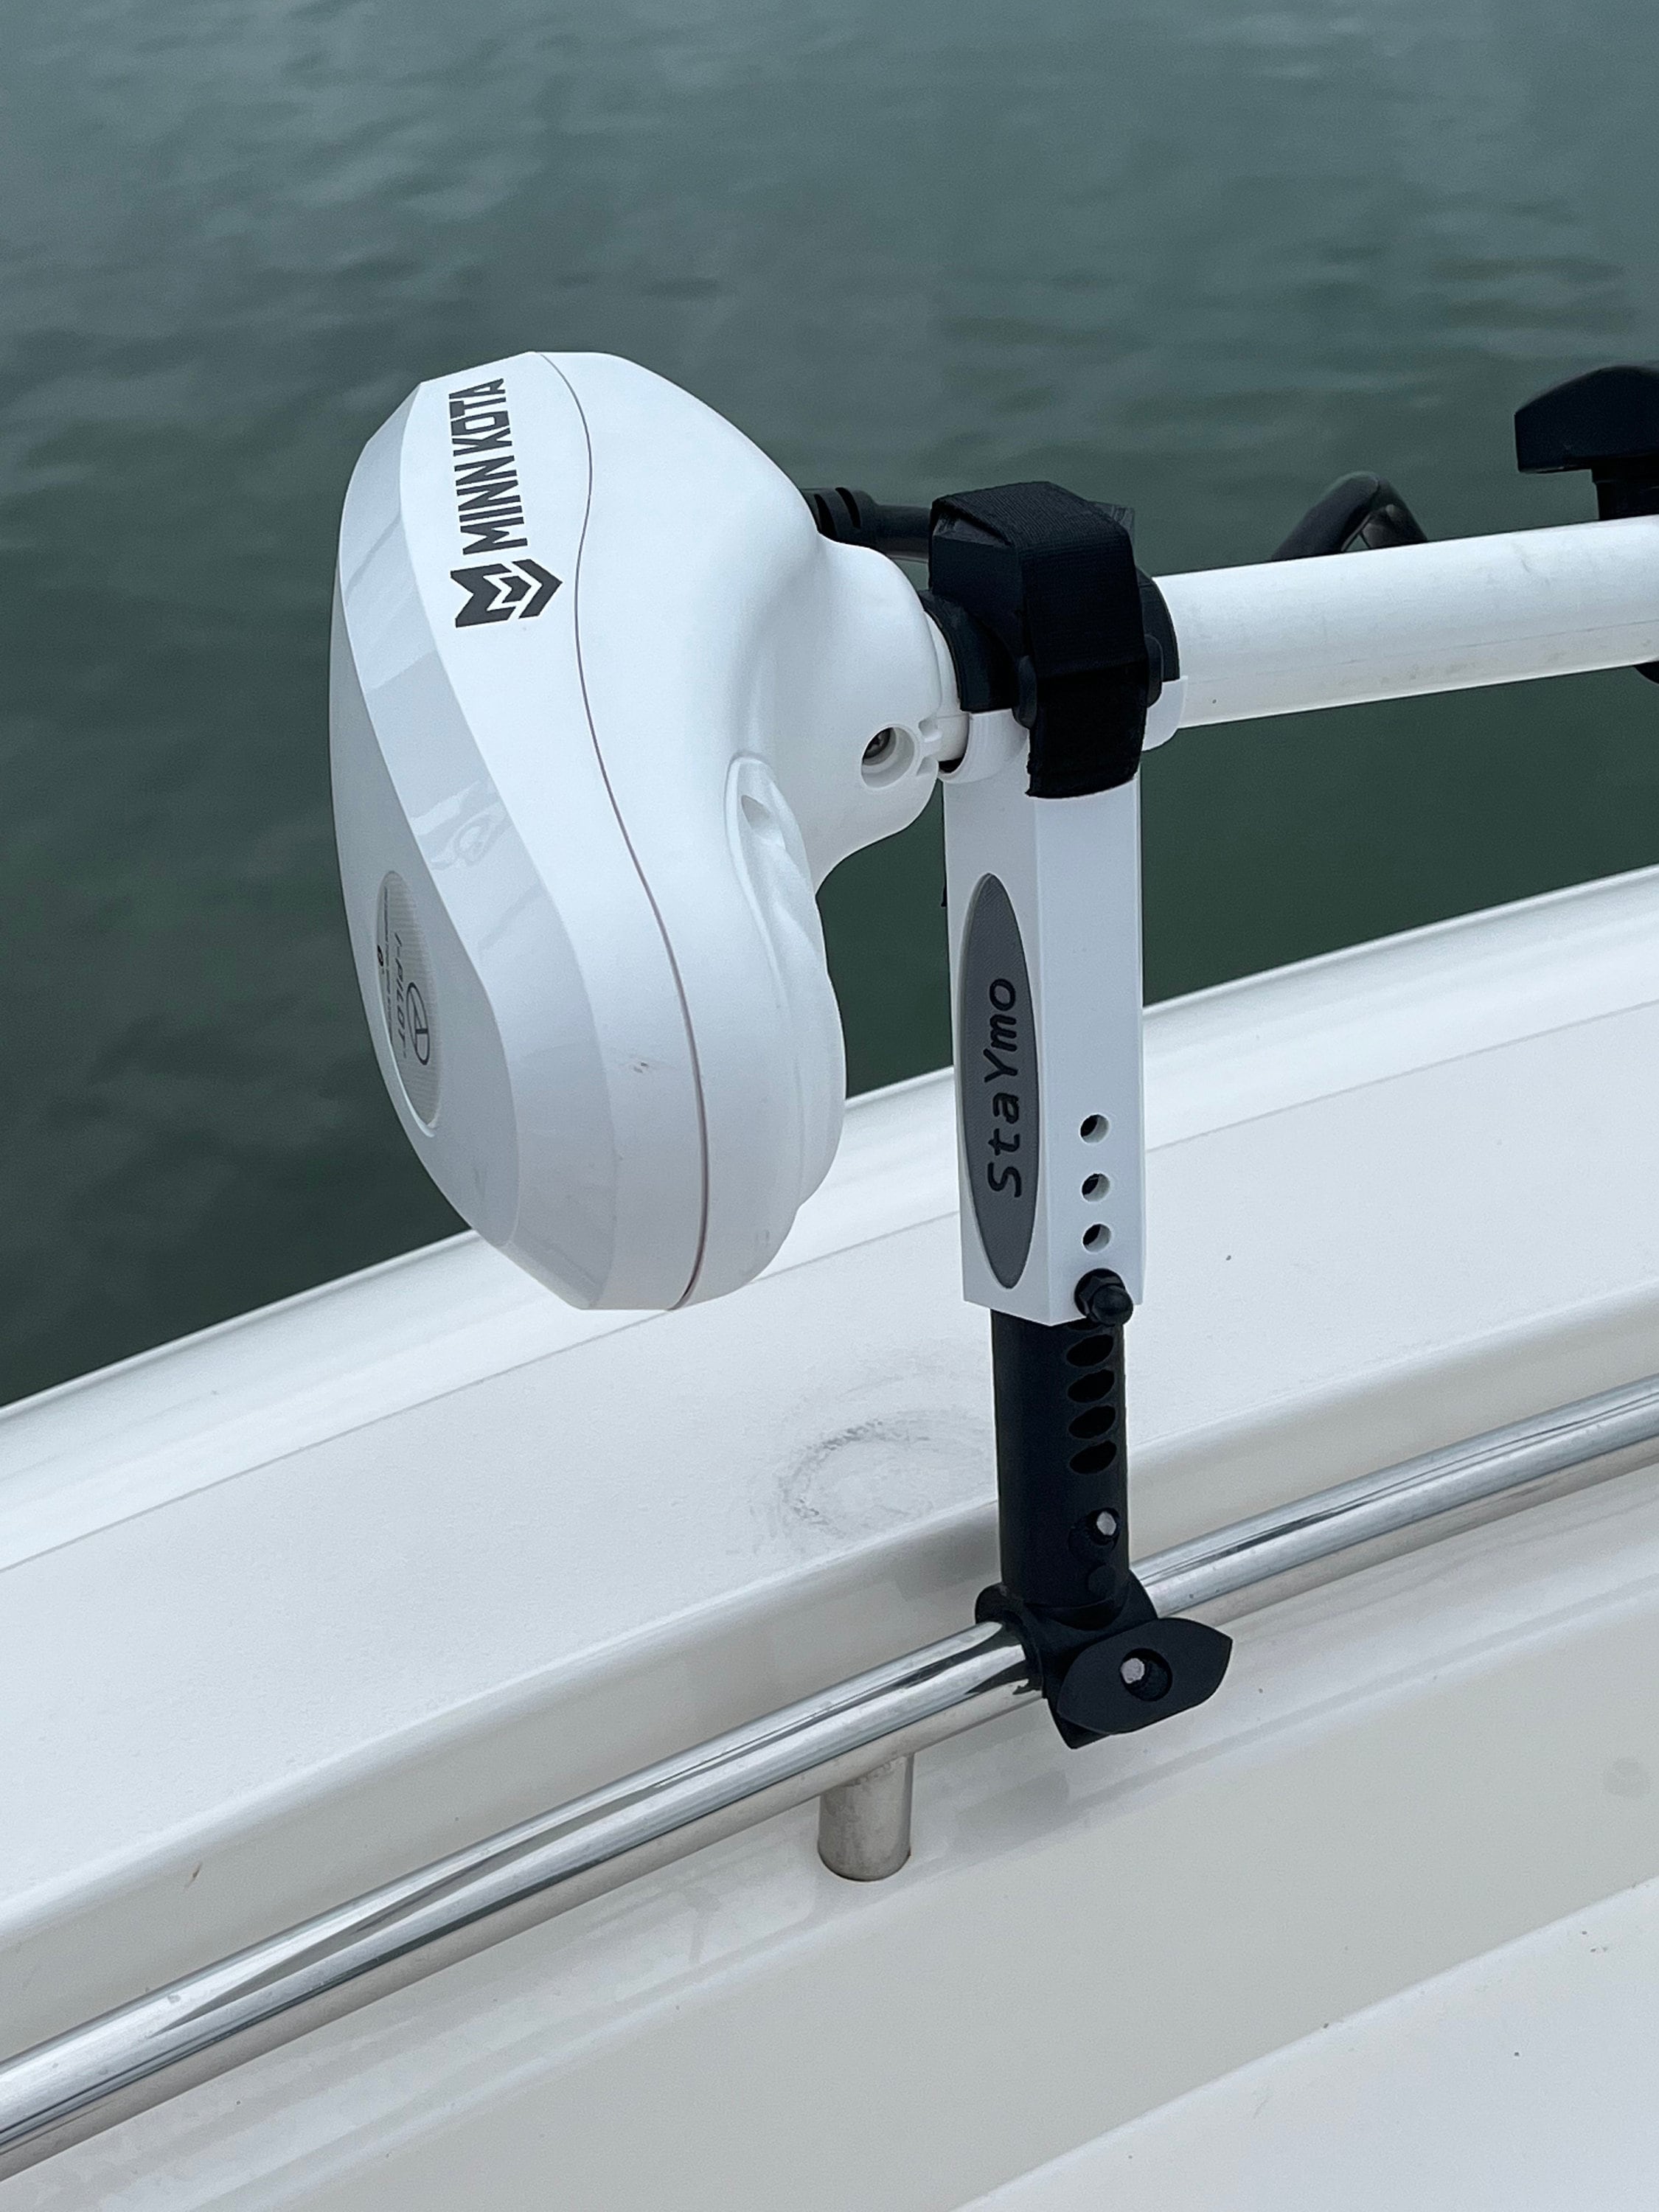 Staymo Shock Absorber/stabilizer for Trolling Motor Bow Rail